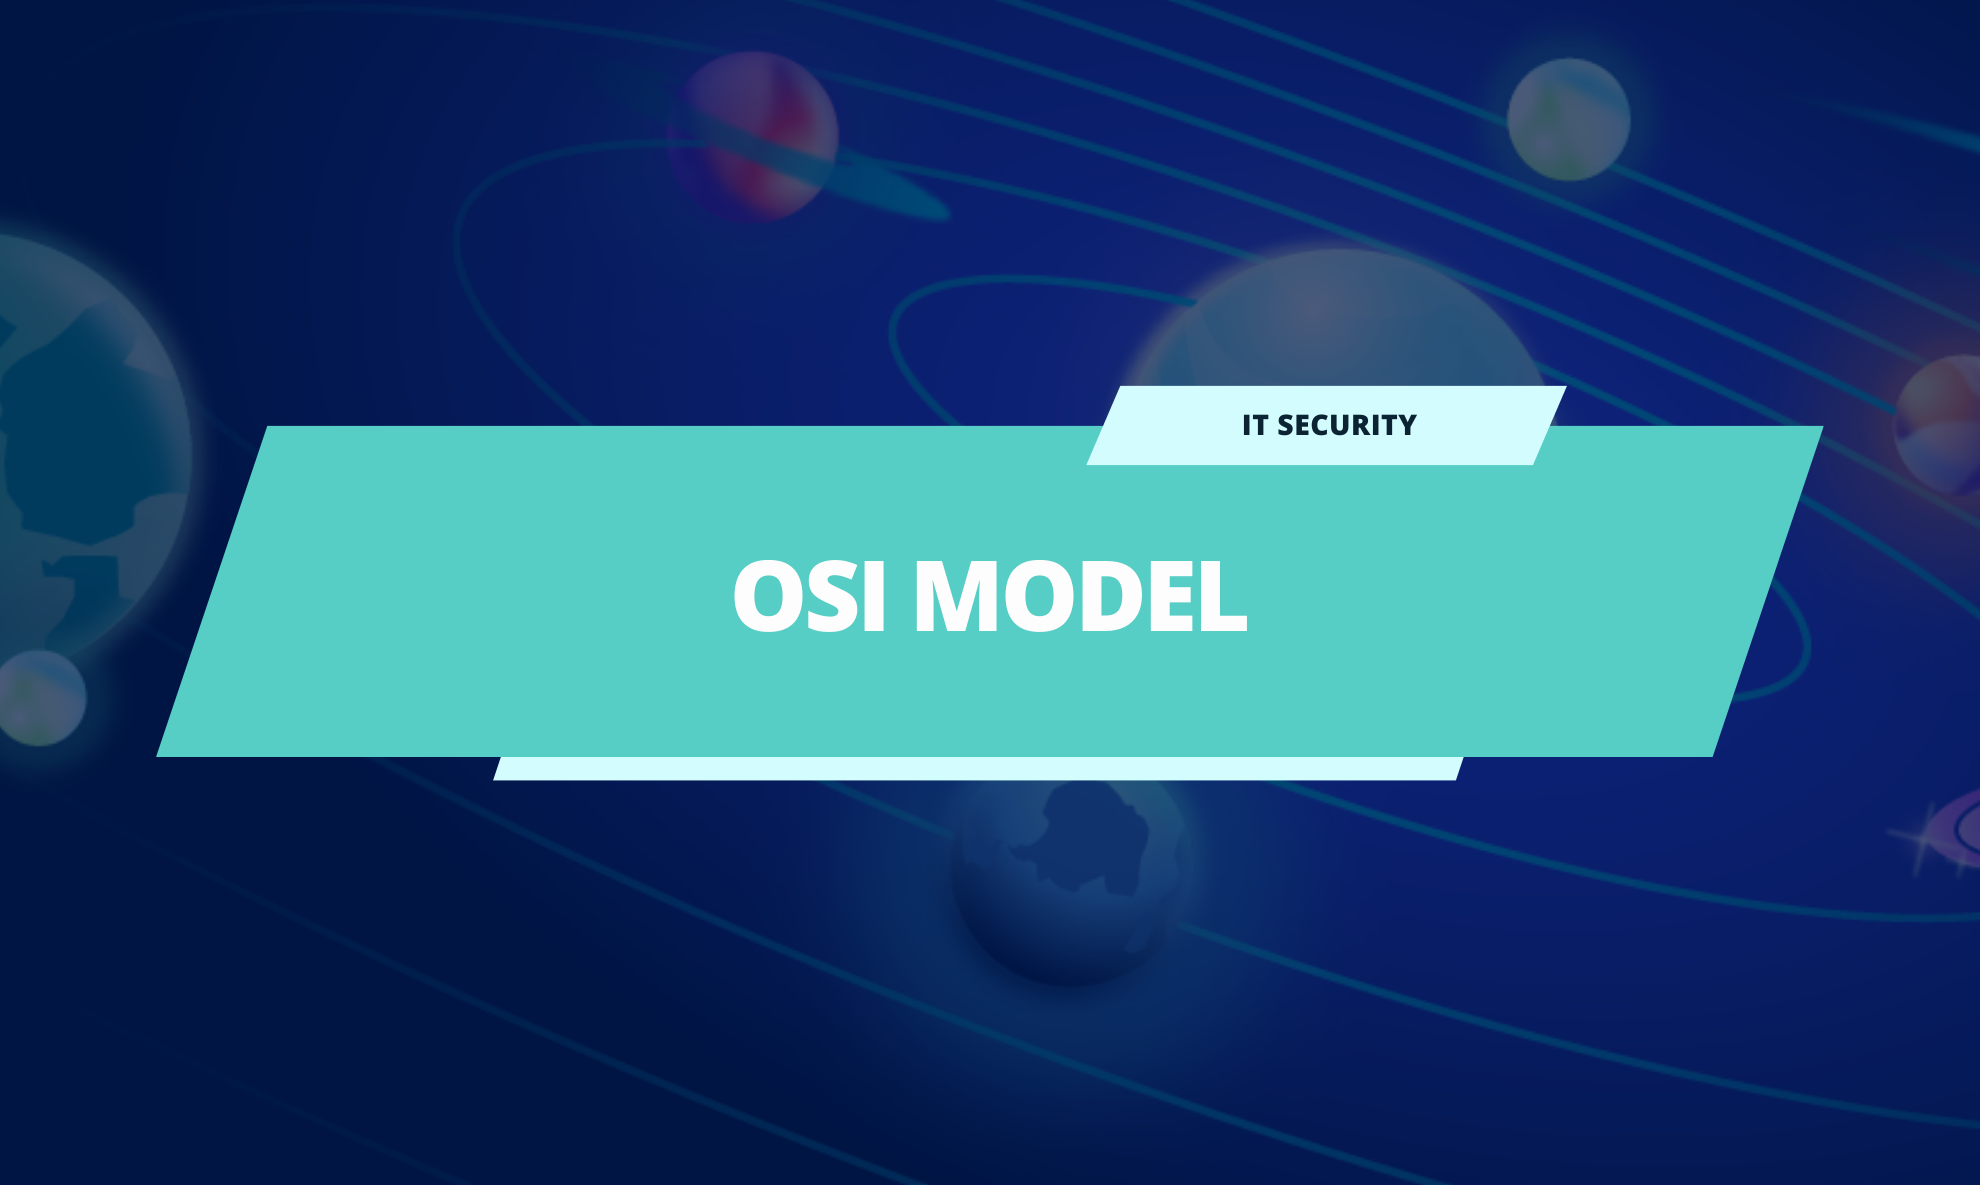 what is the function of presentation layer in osi model